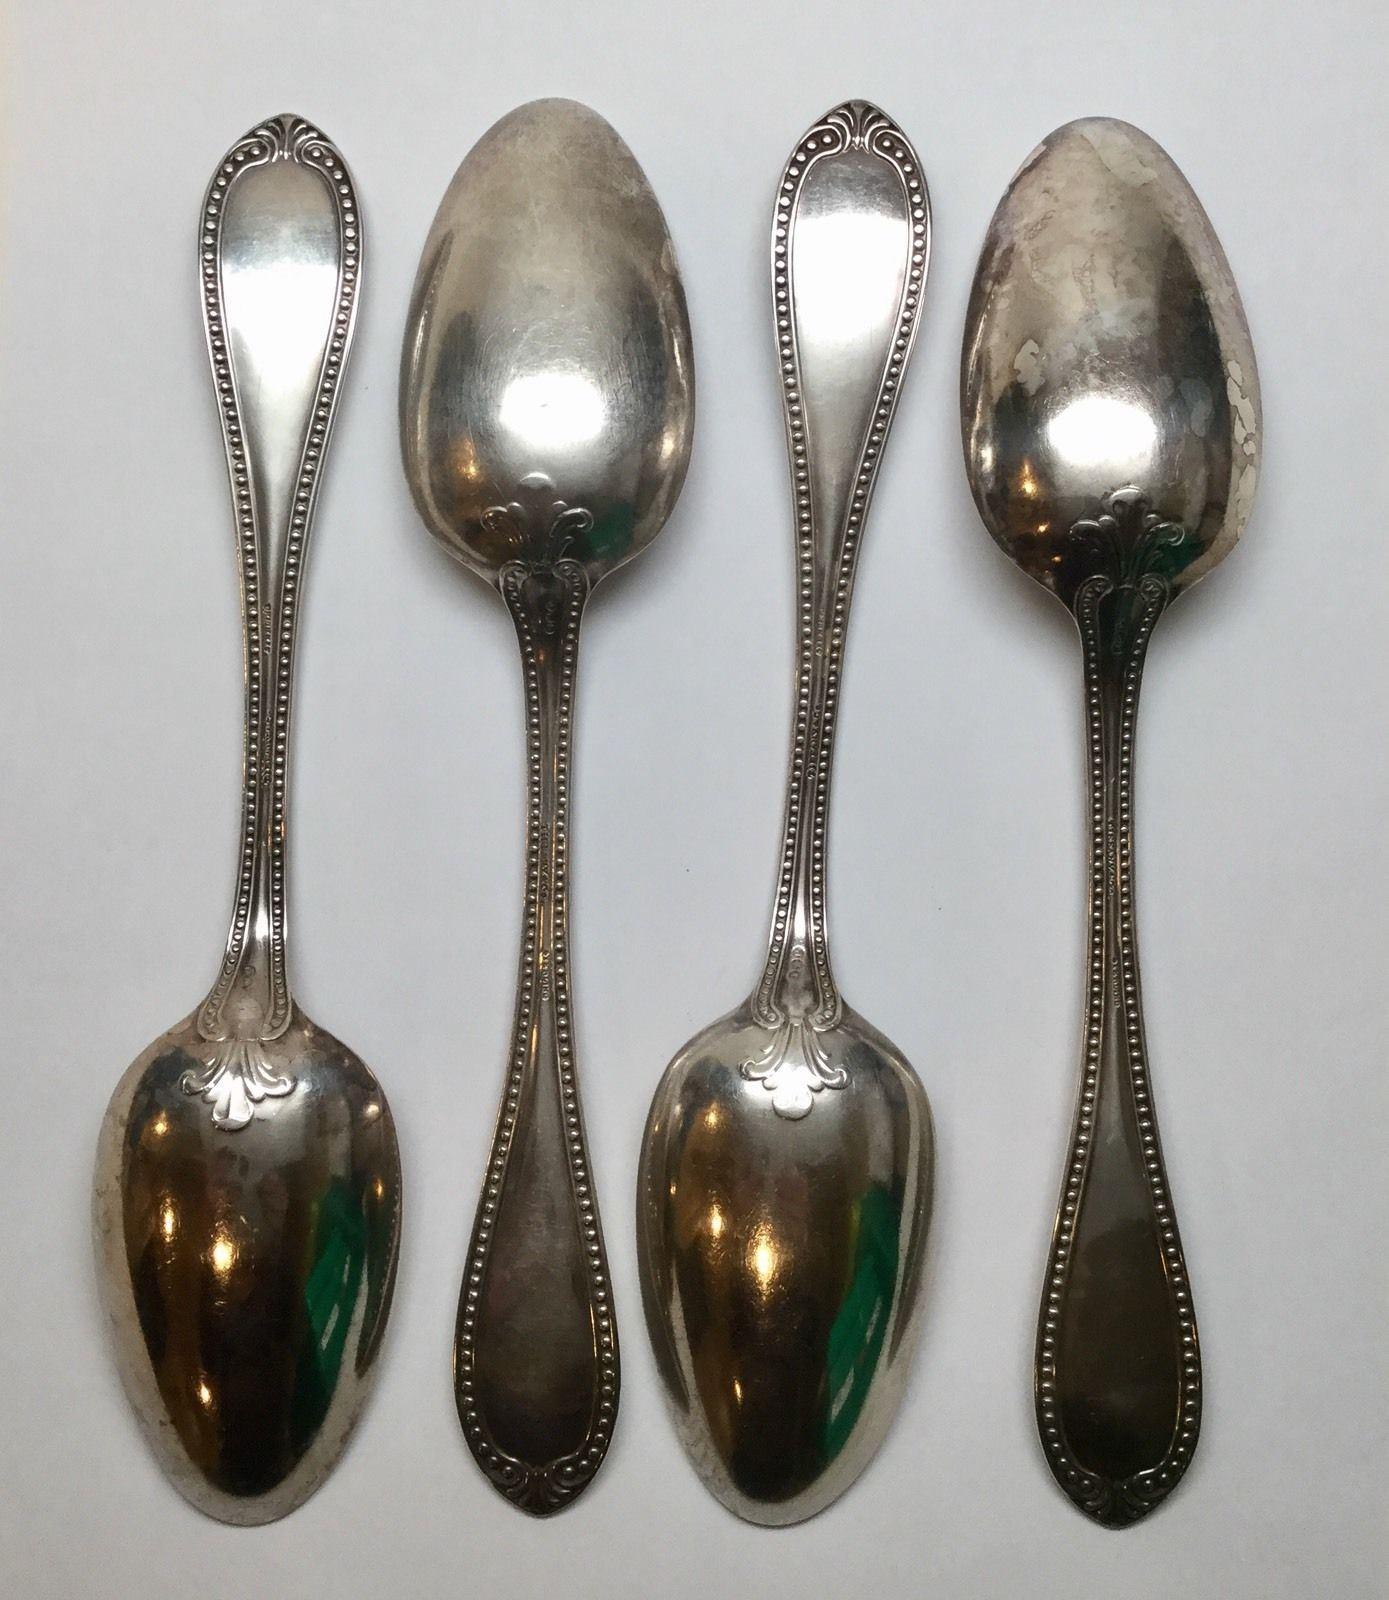 4 John Polhamus for Tiffany & Co. sterling silver tablespoons in the 1850 Bead pattern. 
Marked: J*P, TIFFANY & CO., STERLING.
 Engraved on handle: Louisa Le Huray. 
Measures: 8 1/2